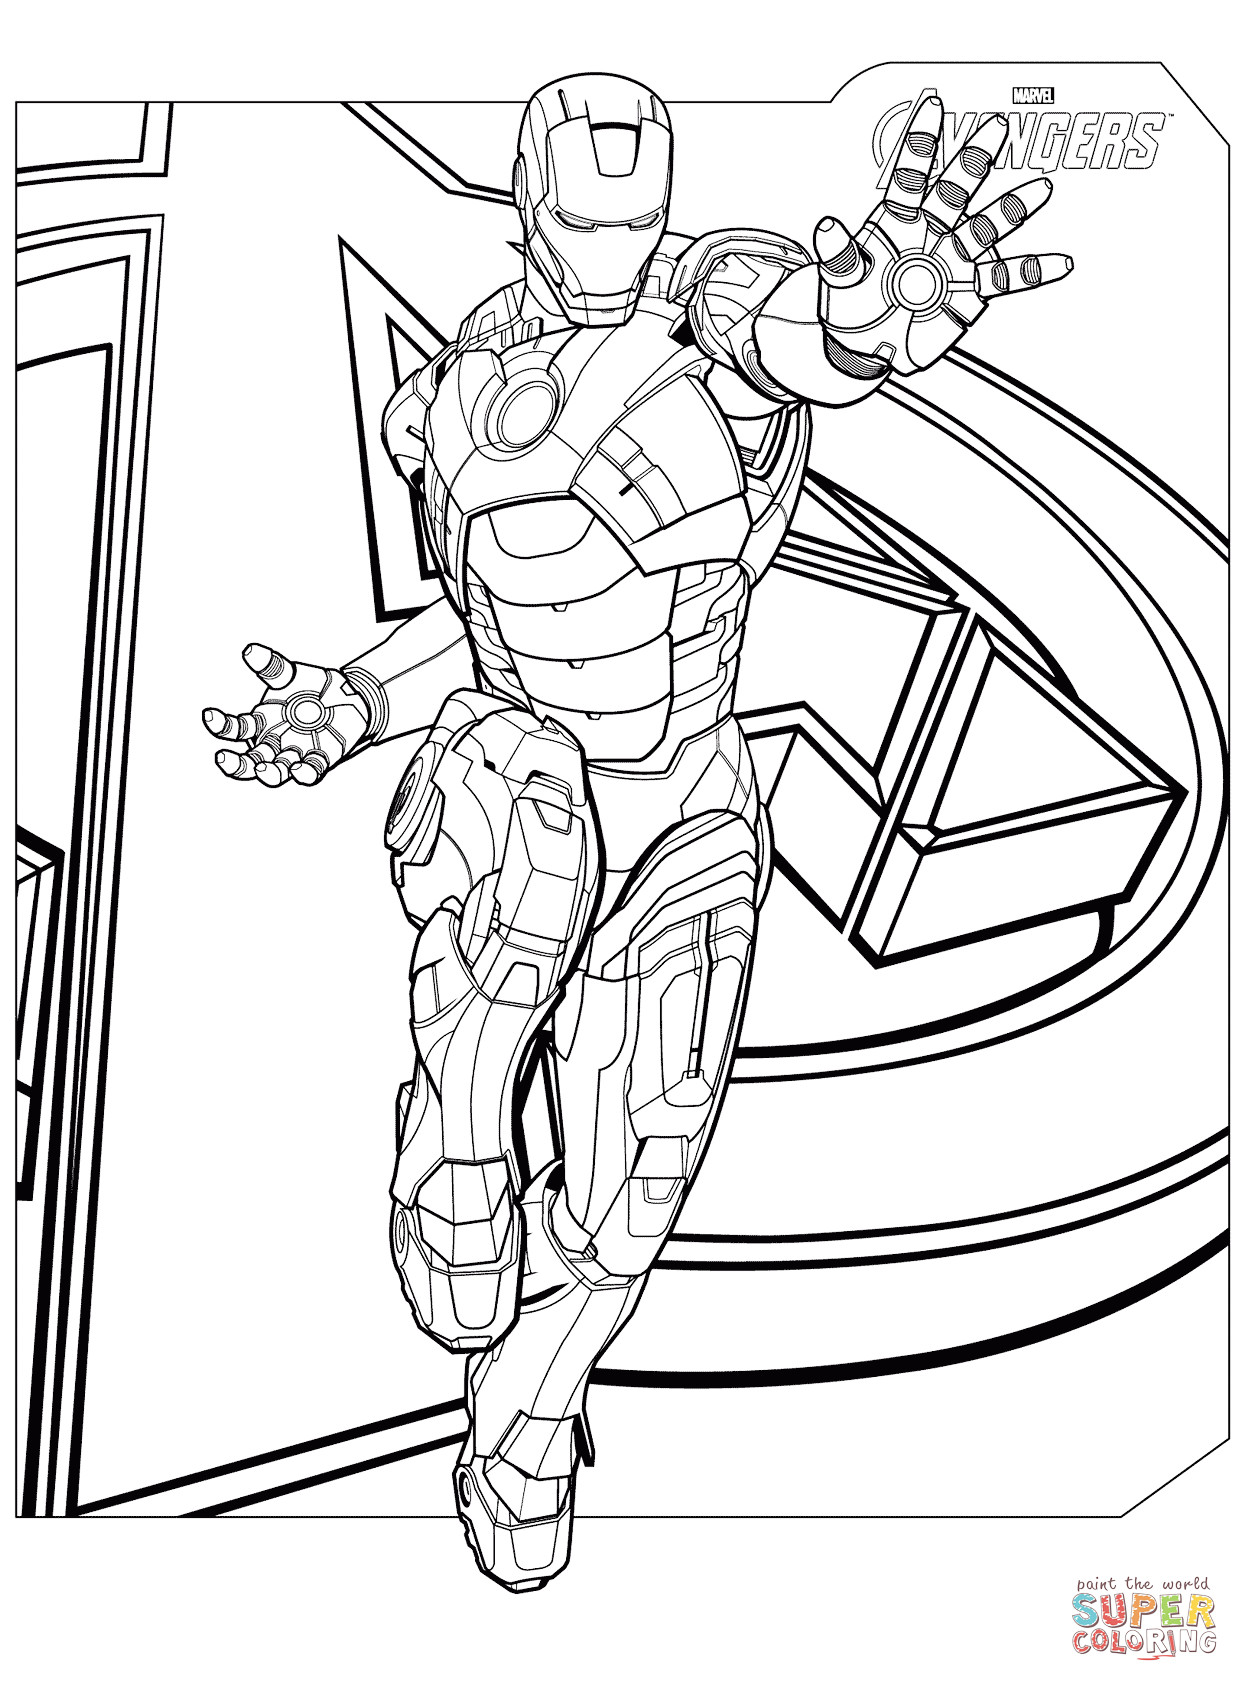 Avengers Coloring Pages Printable
 Avengers Iron Man coloring page